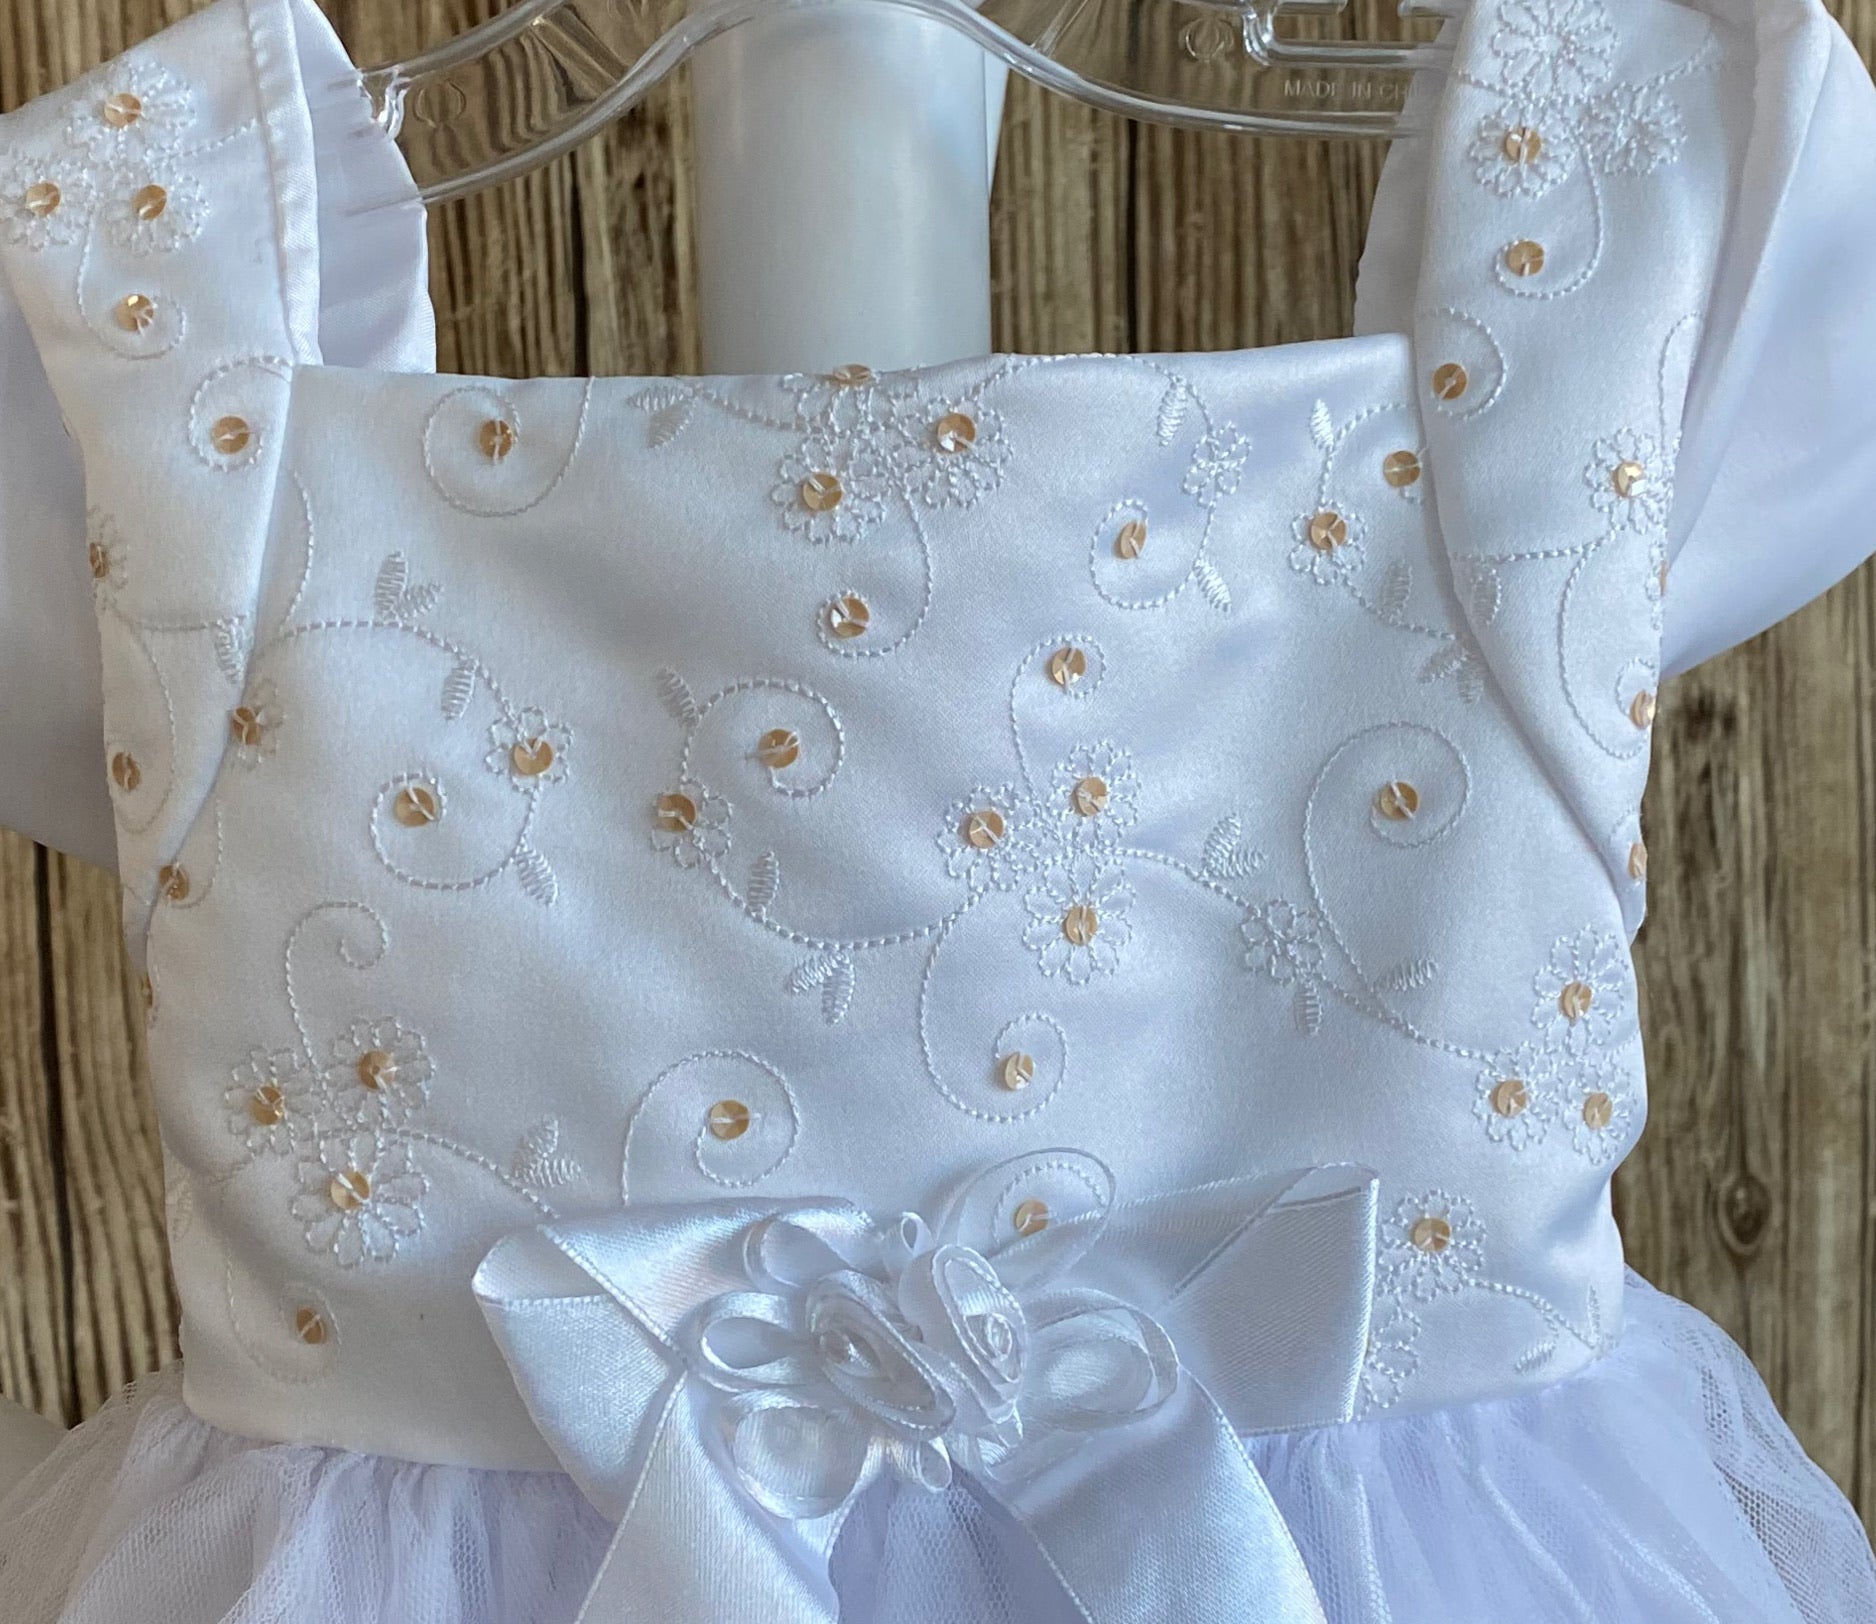  This a beautiful, one-of-a-kind baptism gown.  A lovely gown for a precious child.  White, size 12M Satin bodice with gold (sequins) and white embroidered flowers White cap sleeve  Large bow with floral center on bodice edge Tulle skirting with white roses Ribbon edge around tulle skirt Large ribbon bow in back 